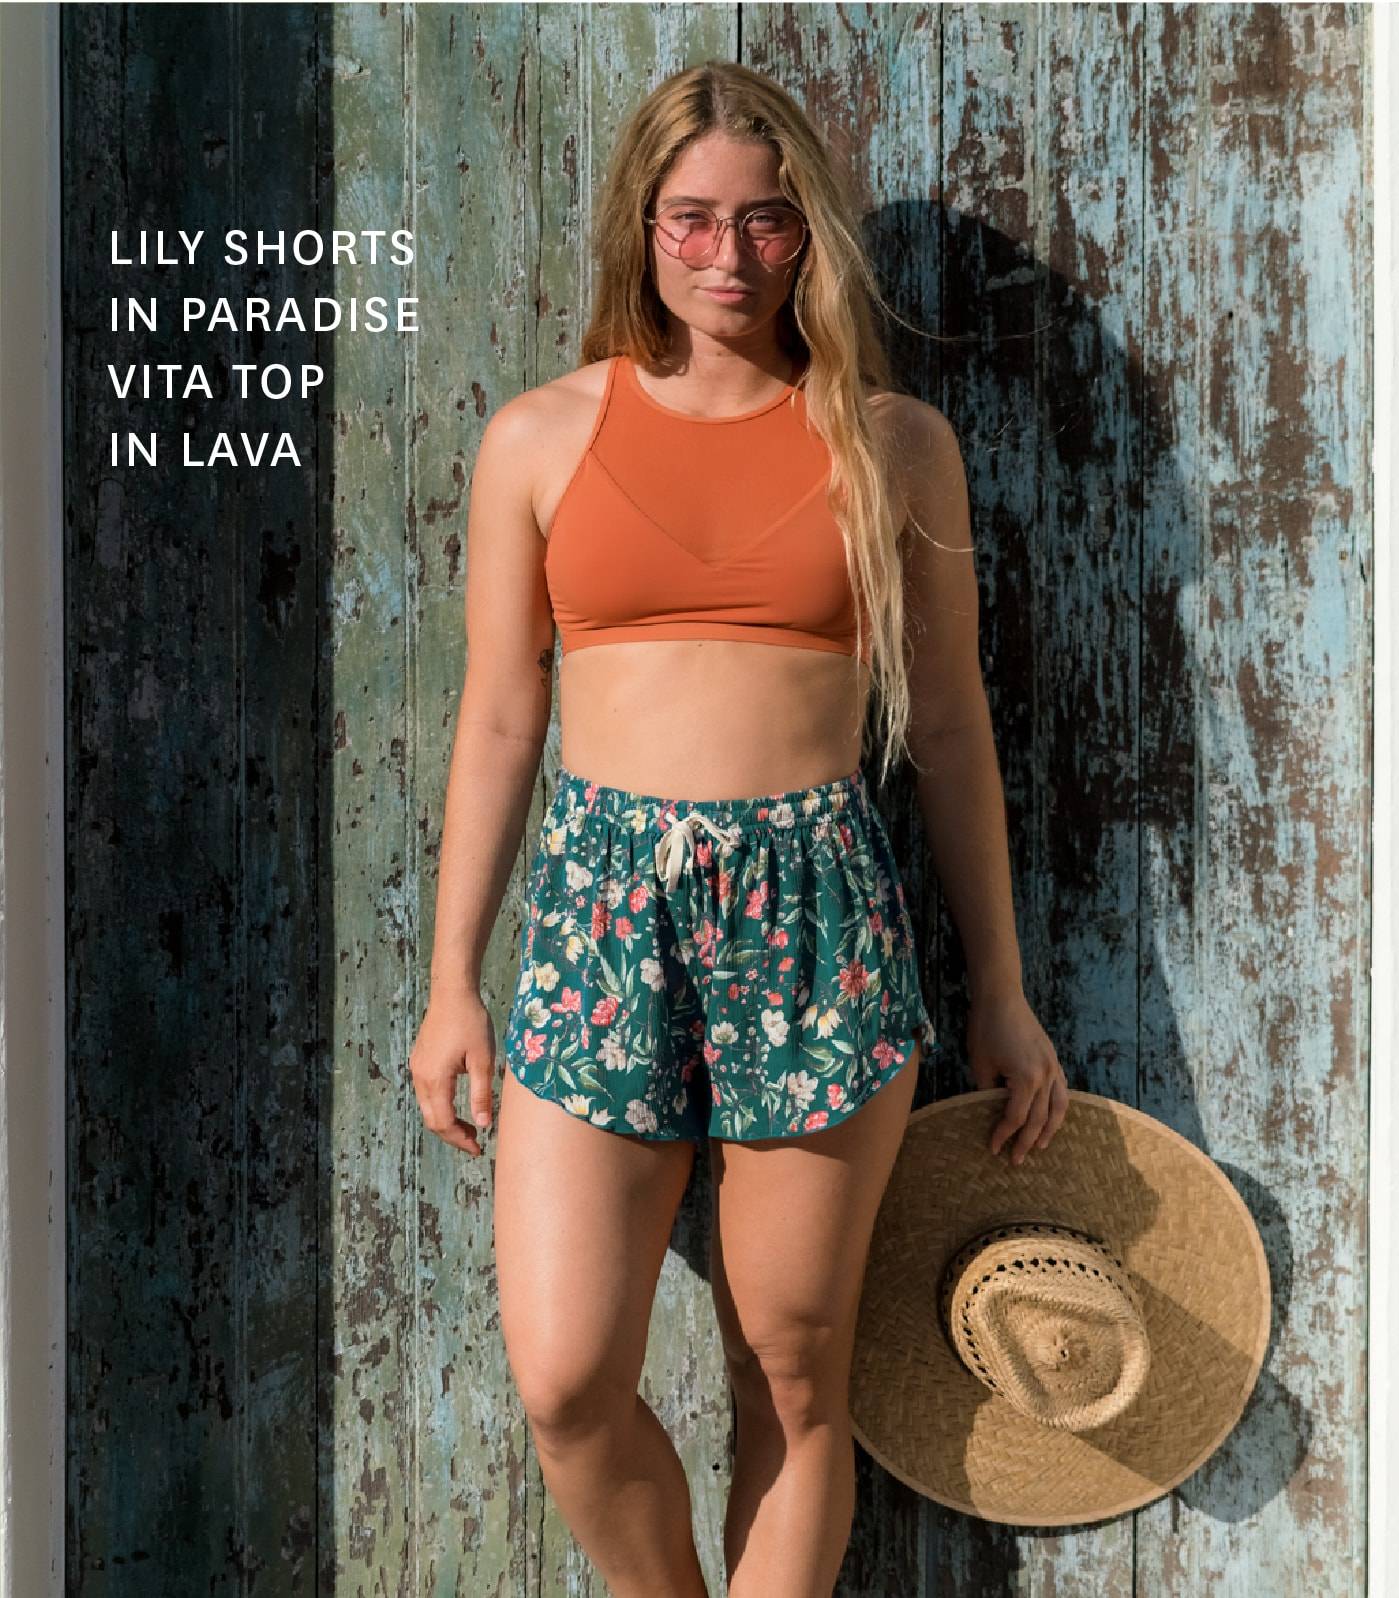 Get the LILY Shorts in PARADISE!